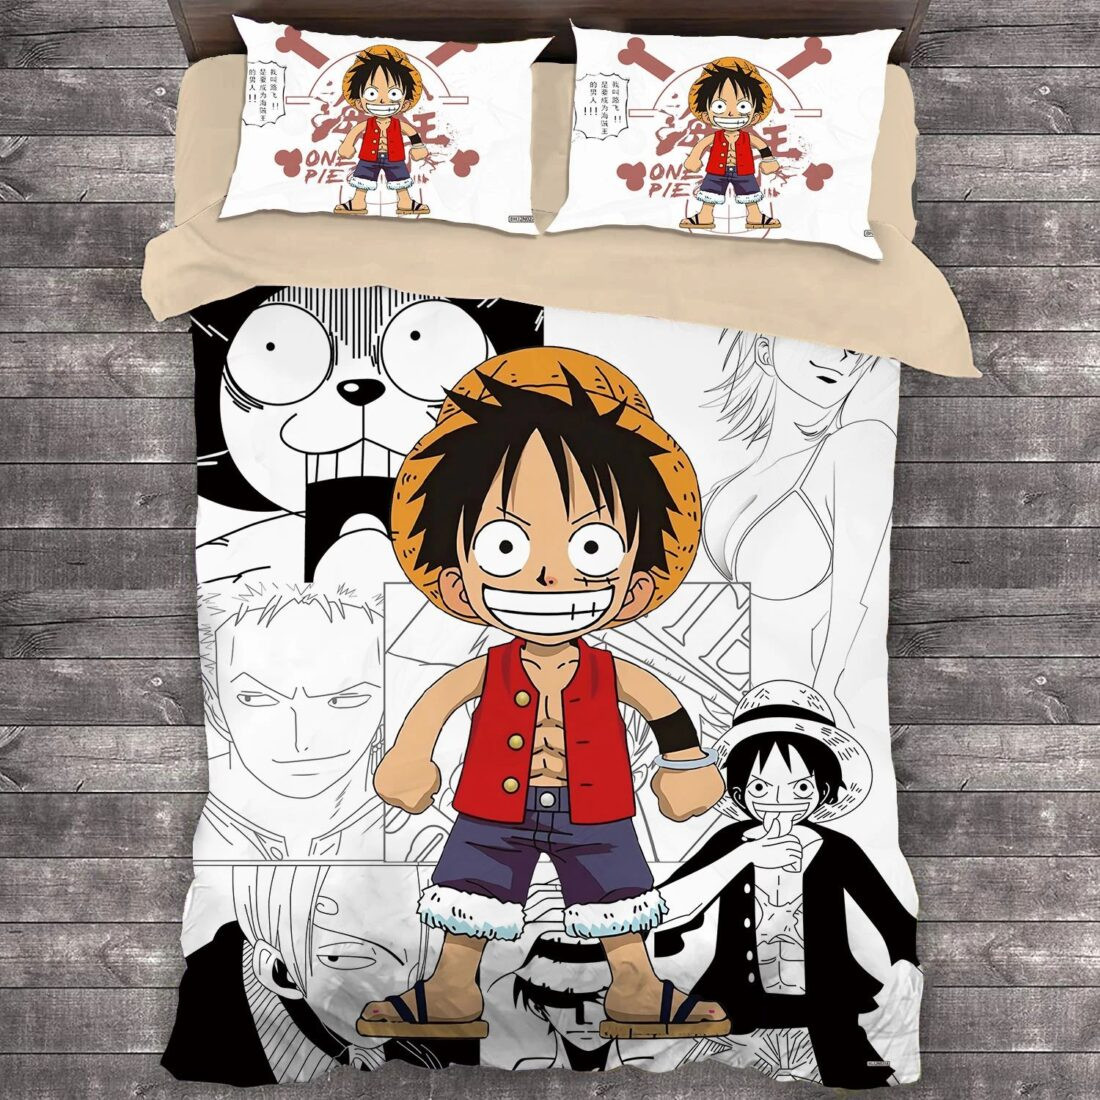 Comic One Piece Luffy and Friends Duvet Cover Set - Bedding Set